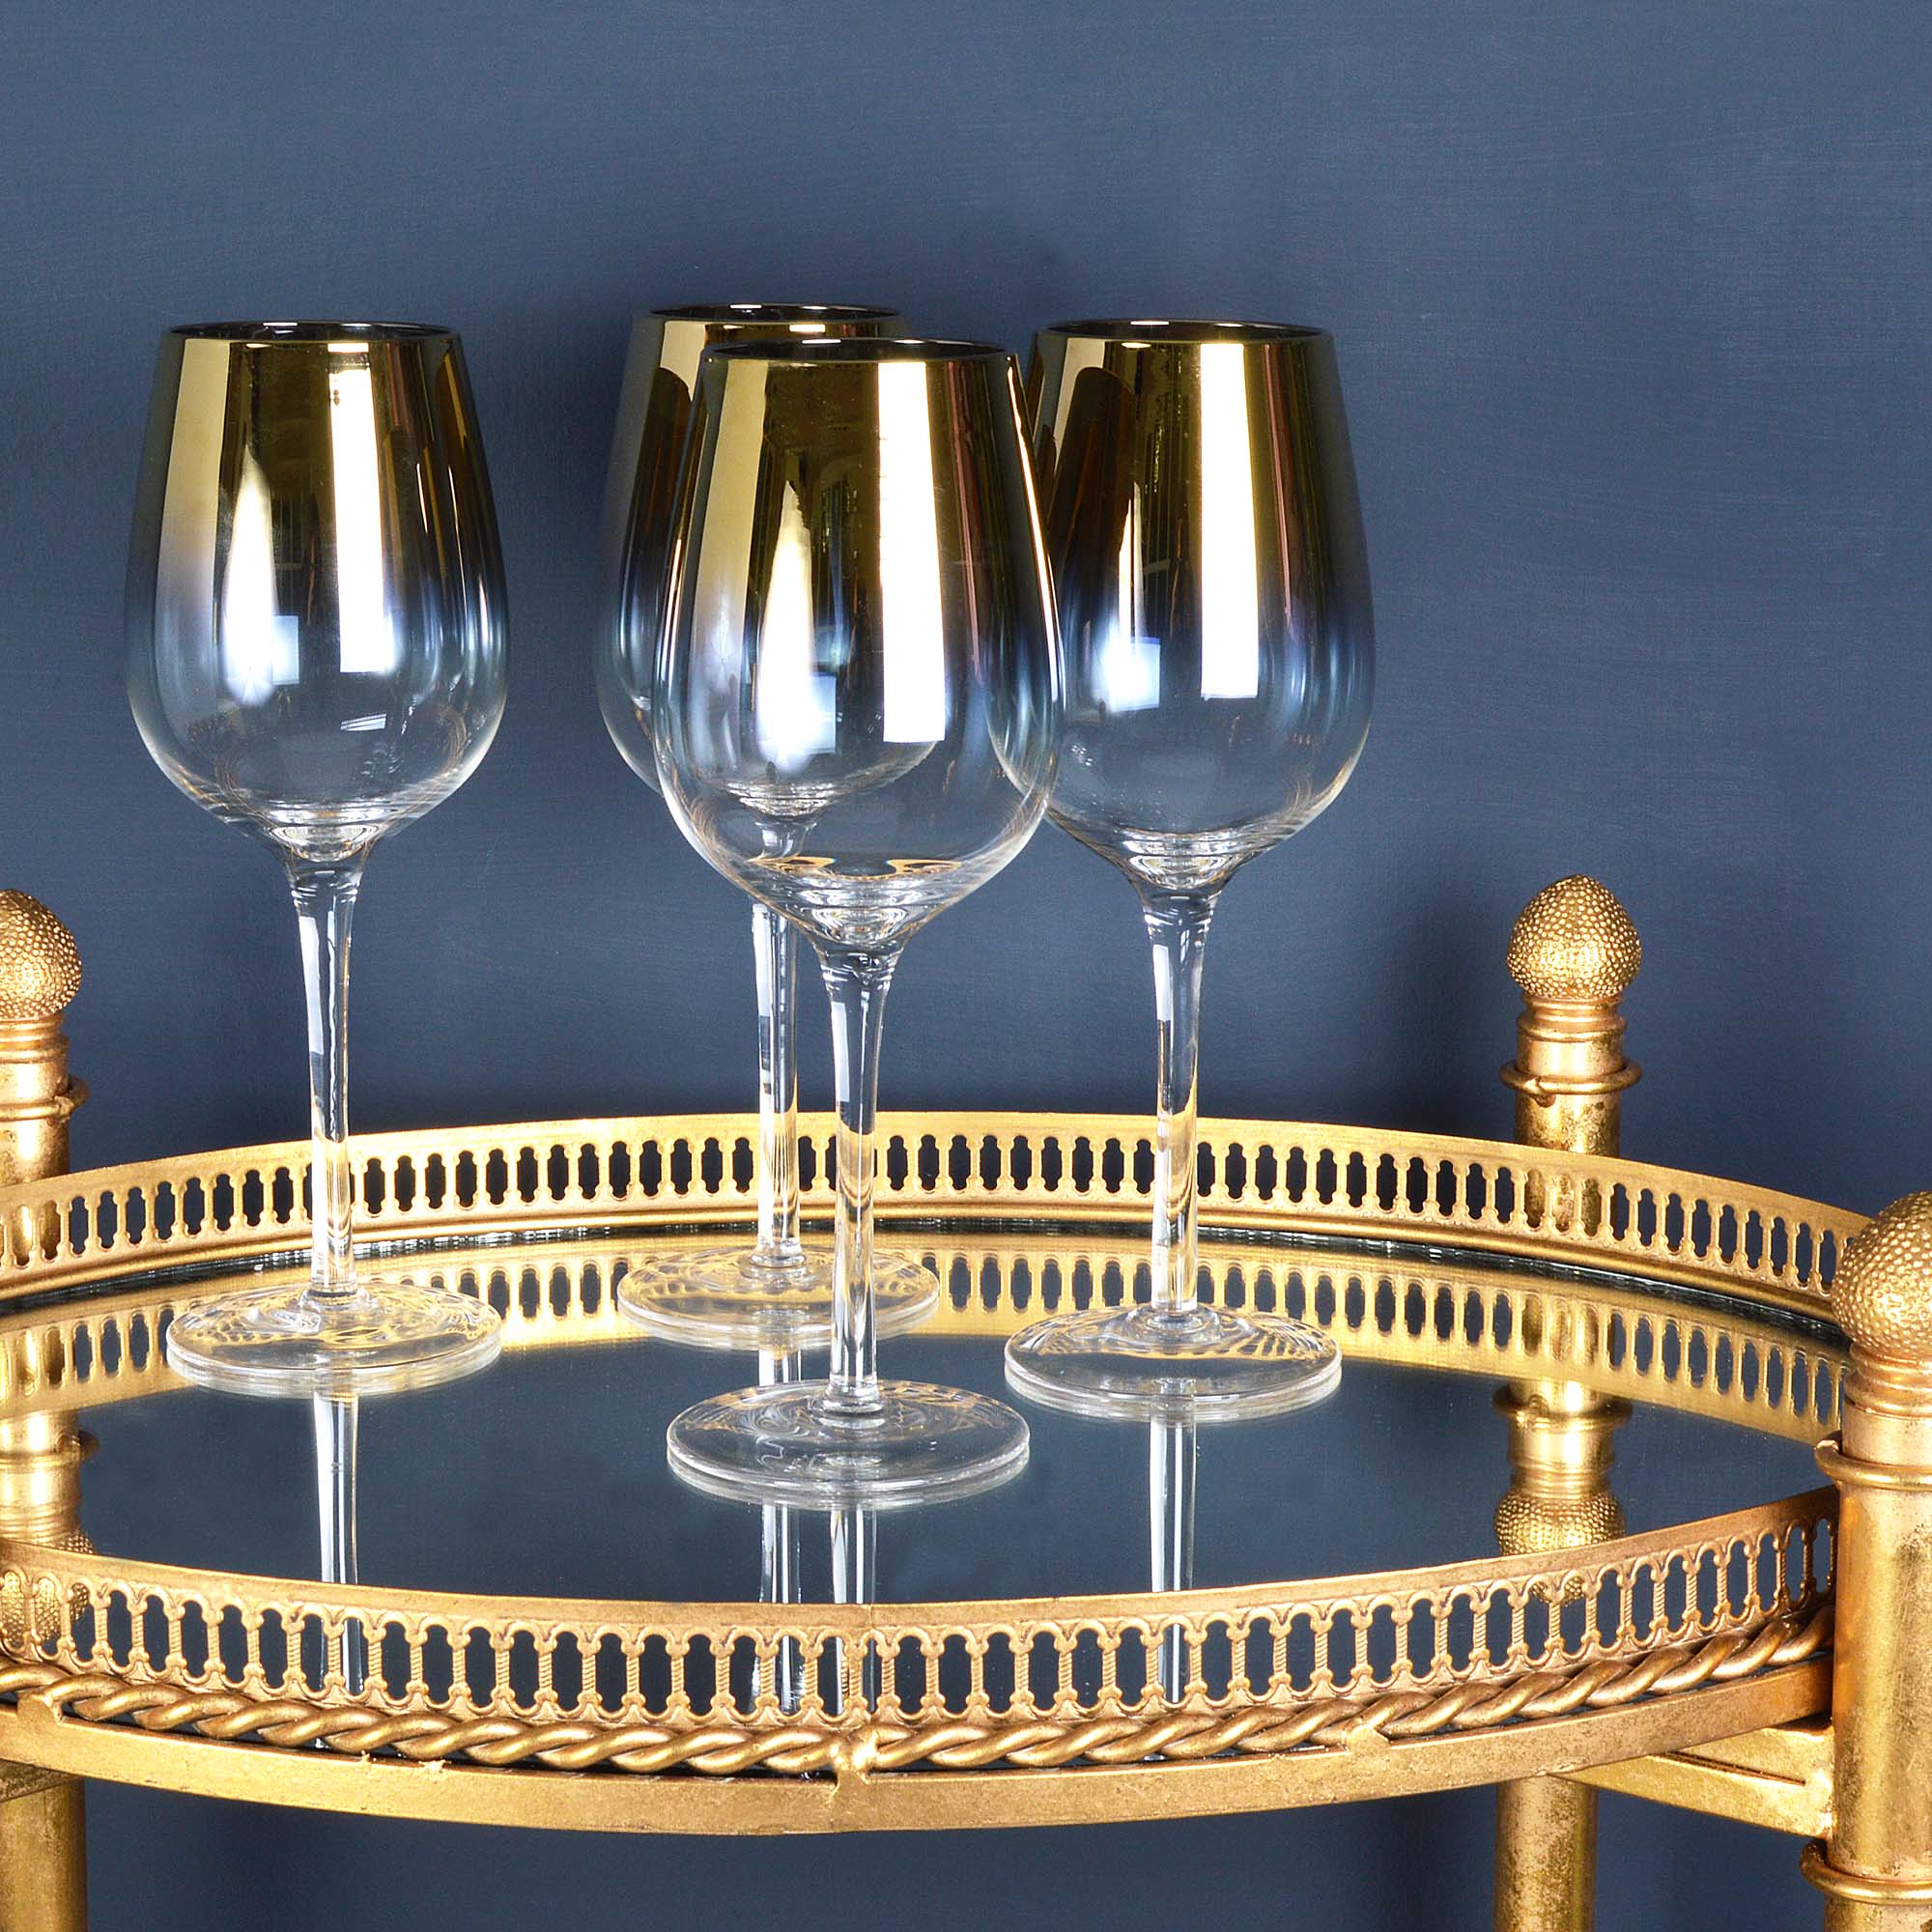 Audenza's ombre wine glasses and decorative drinks stand